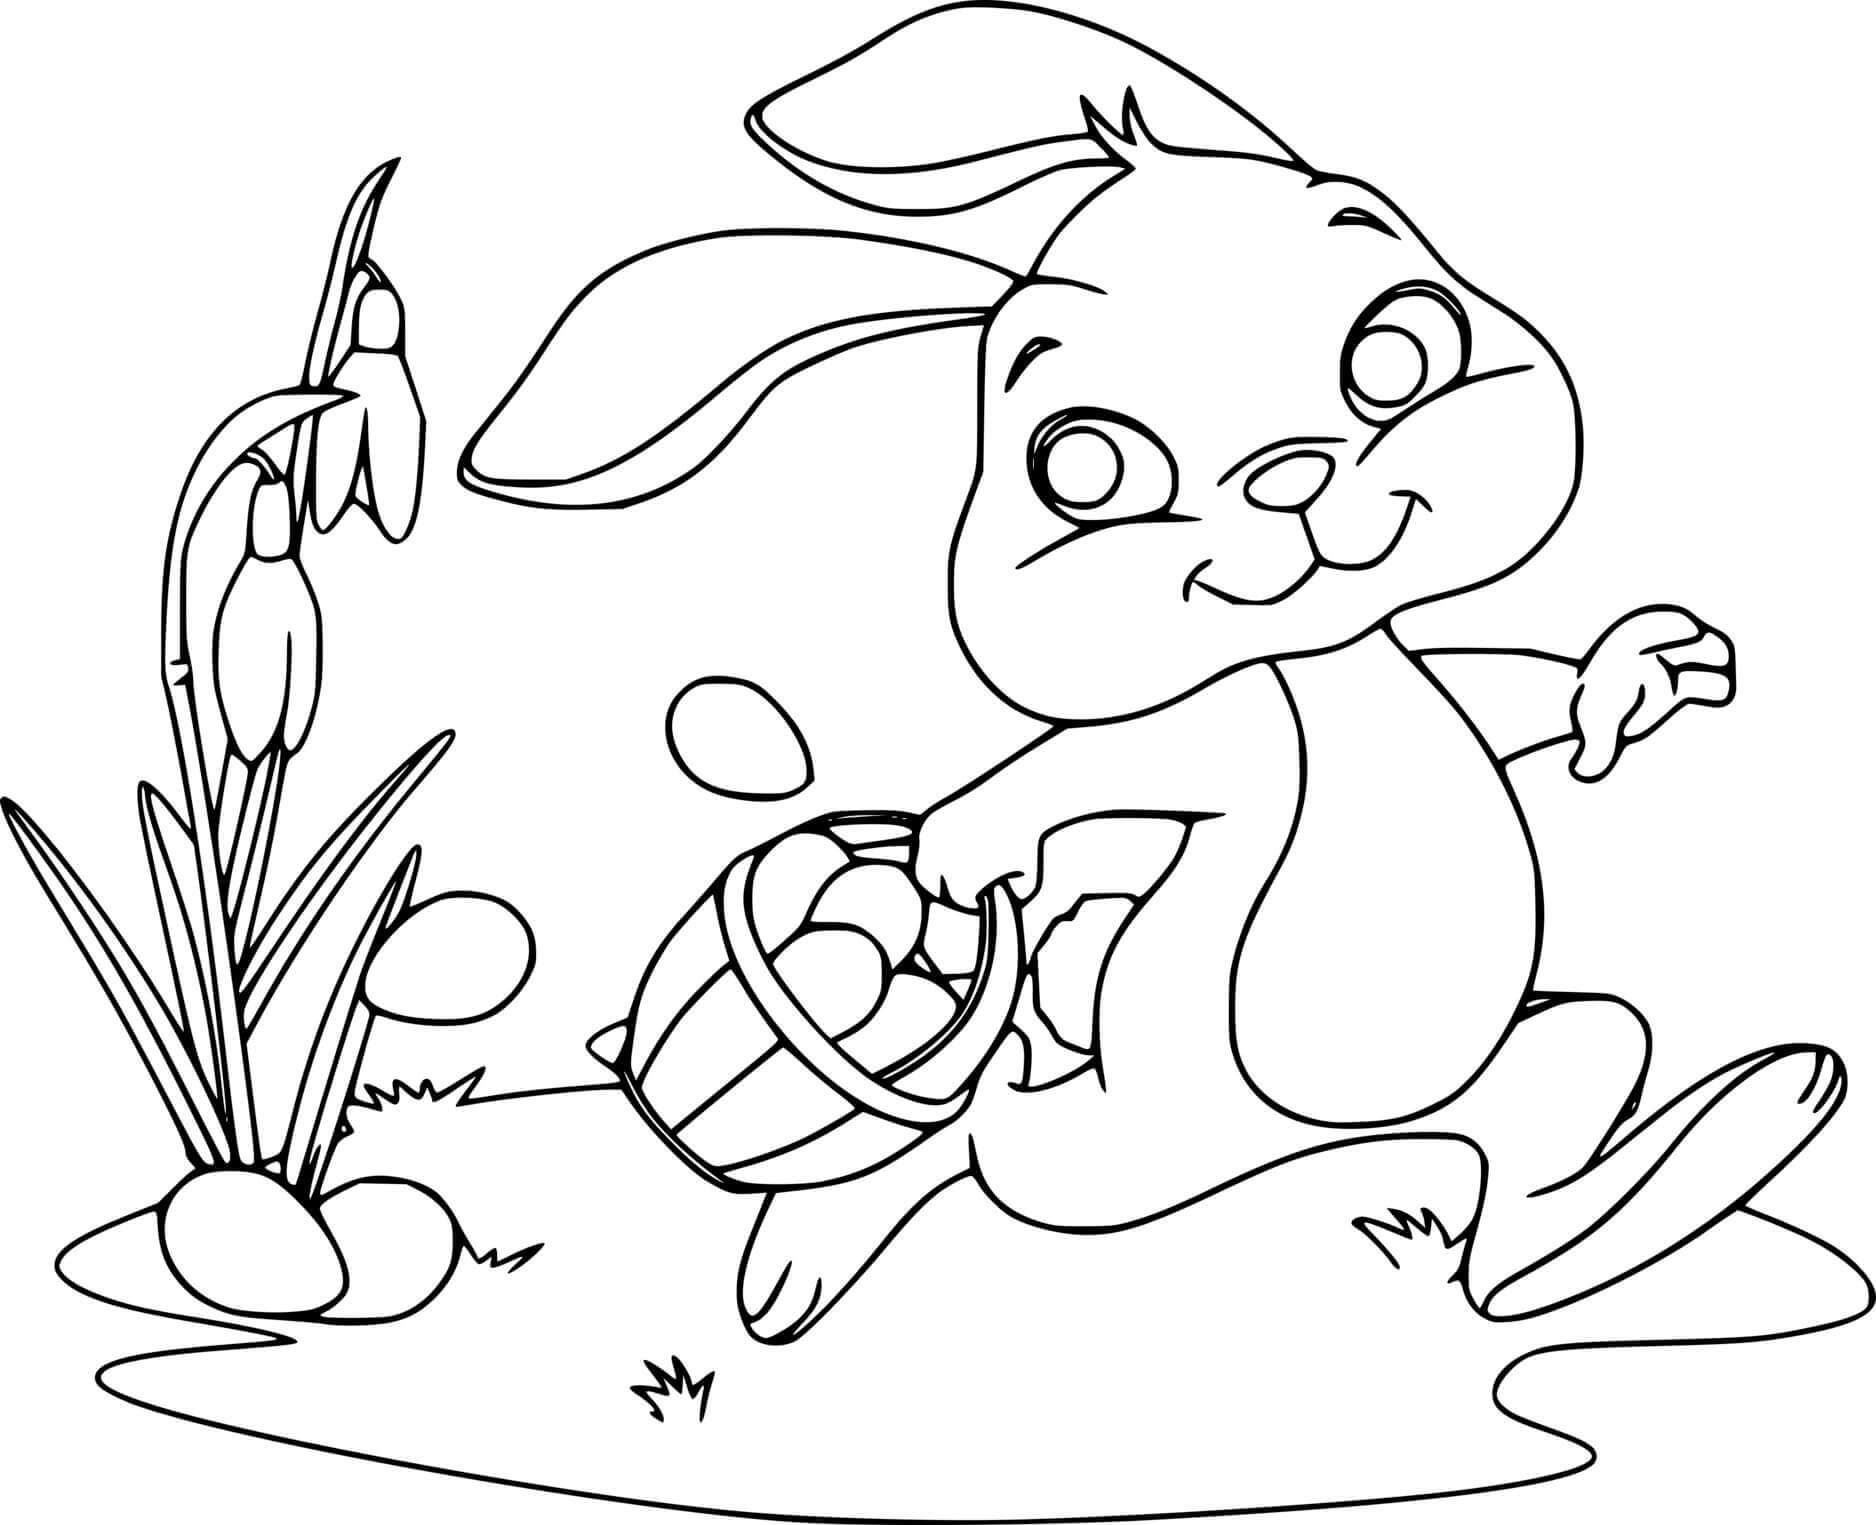 Easy Cute Bunny Holds A Basket Coloring Page